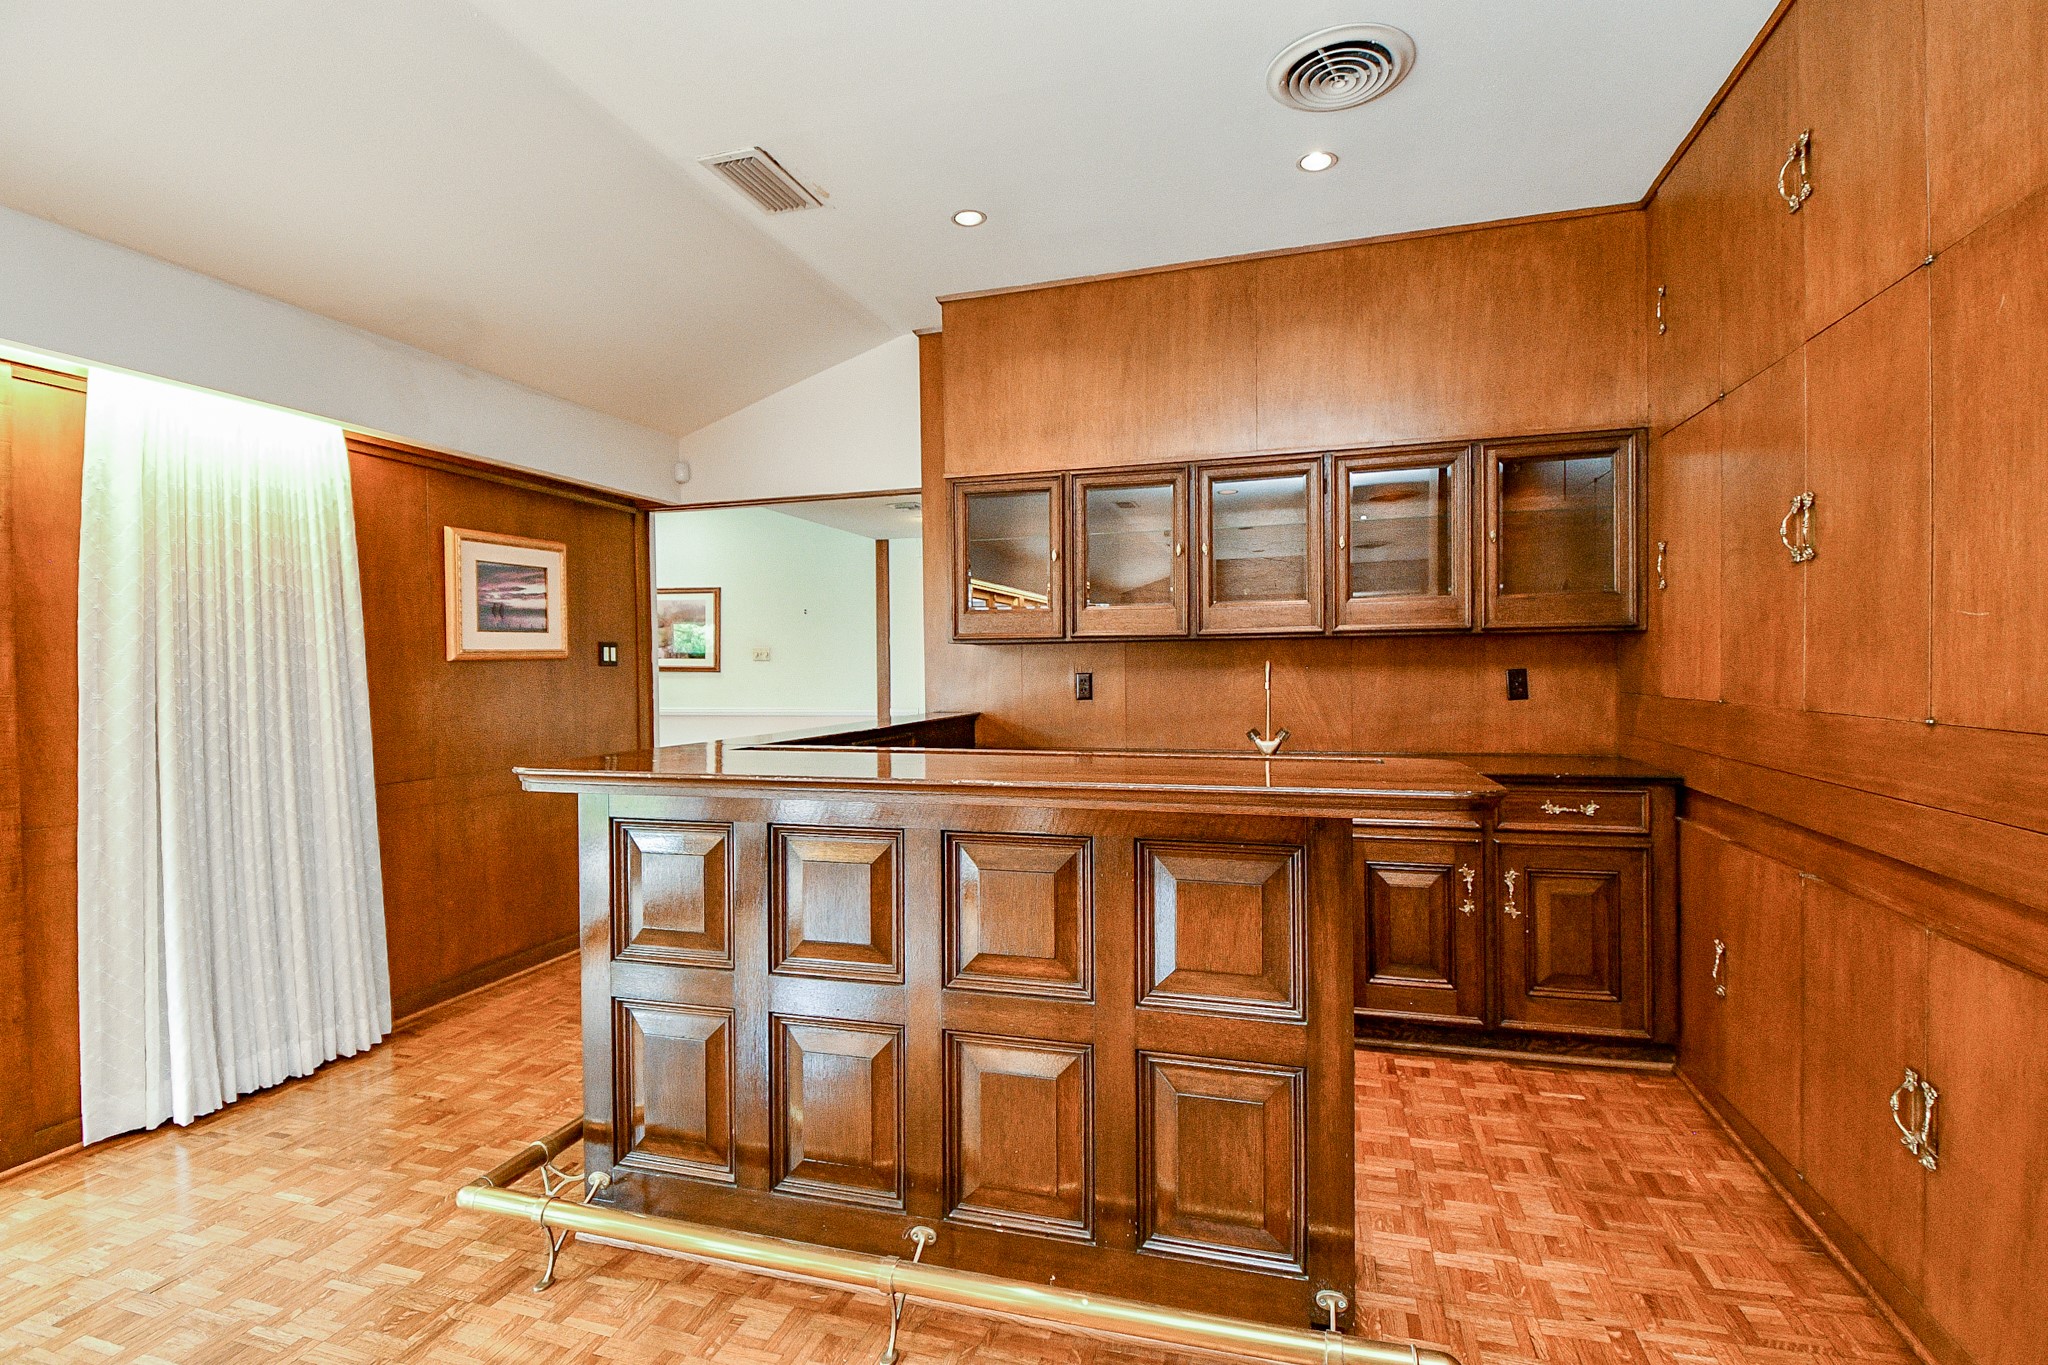 Full wet bar with icemaker is a part of the formal living area.  Note all the cabinets that surround the bar area. This is a beautiful real wood wet bar with a polished brass bar foot rain on both sides.